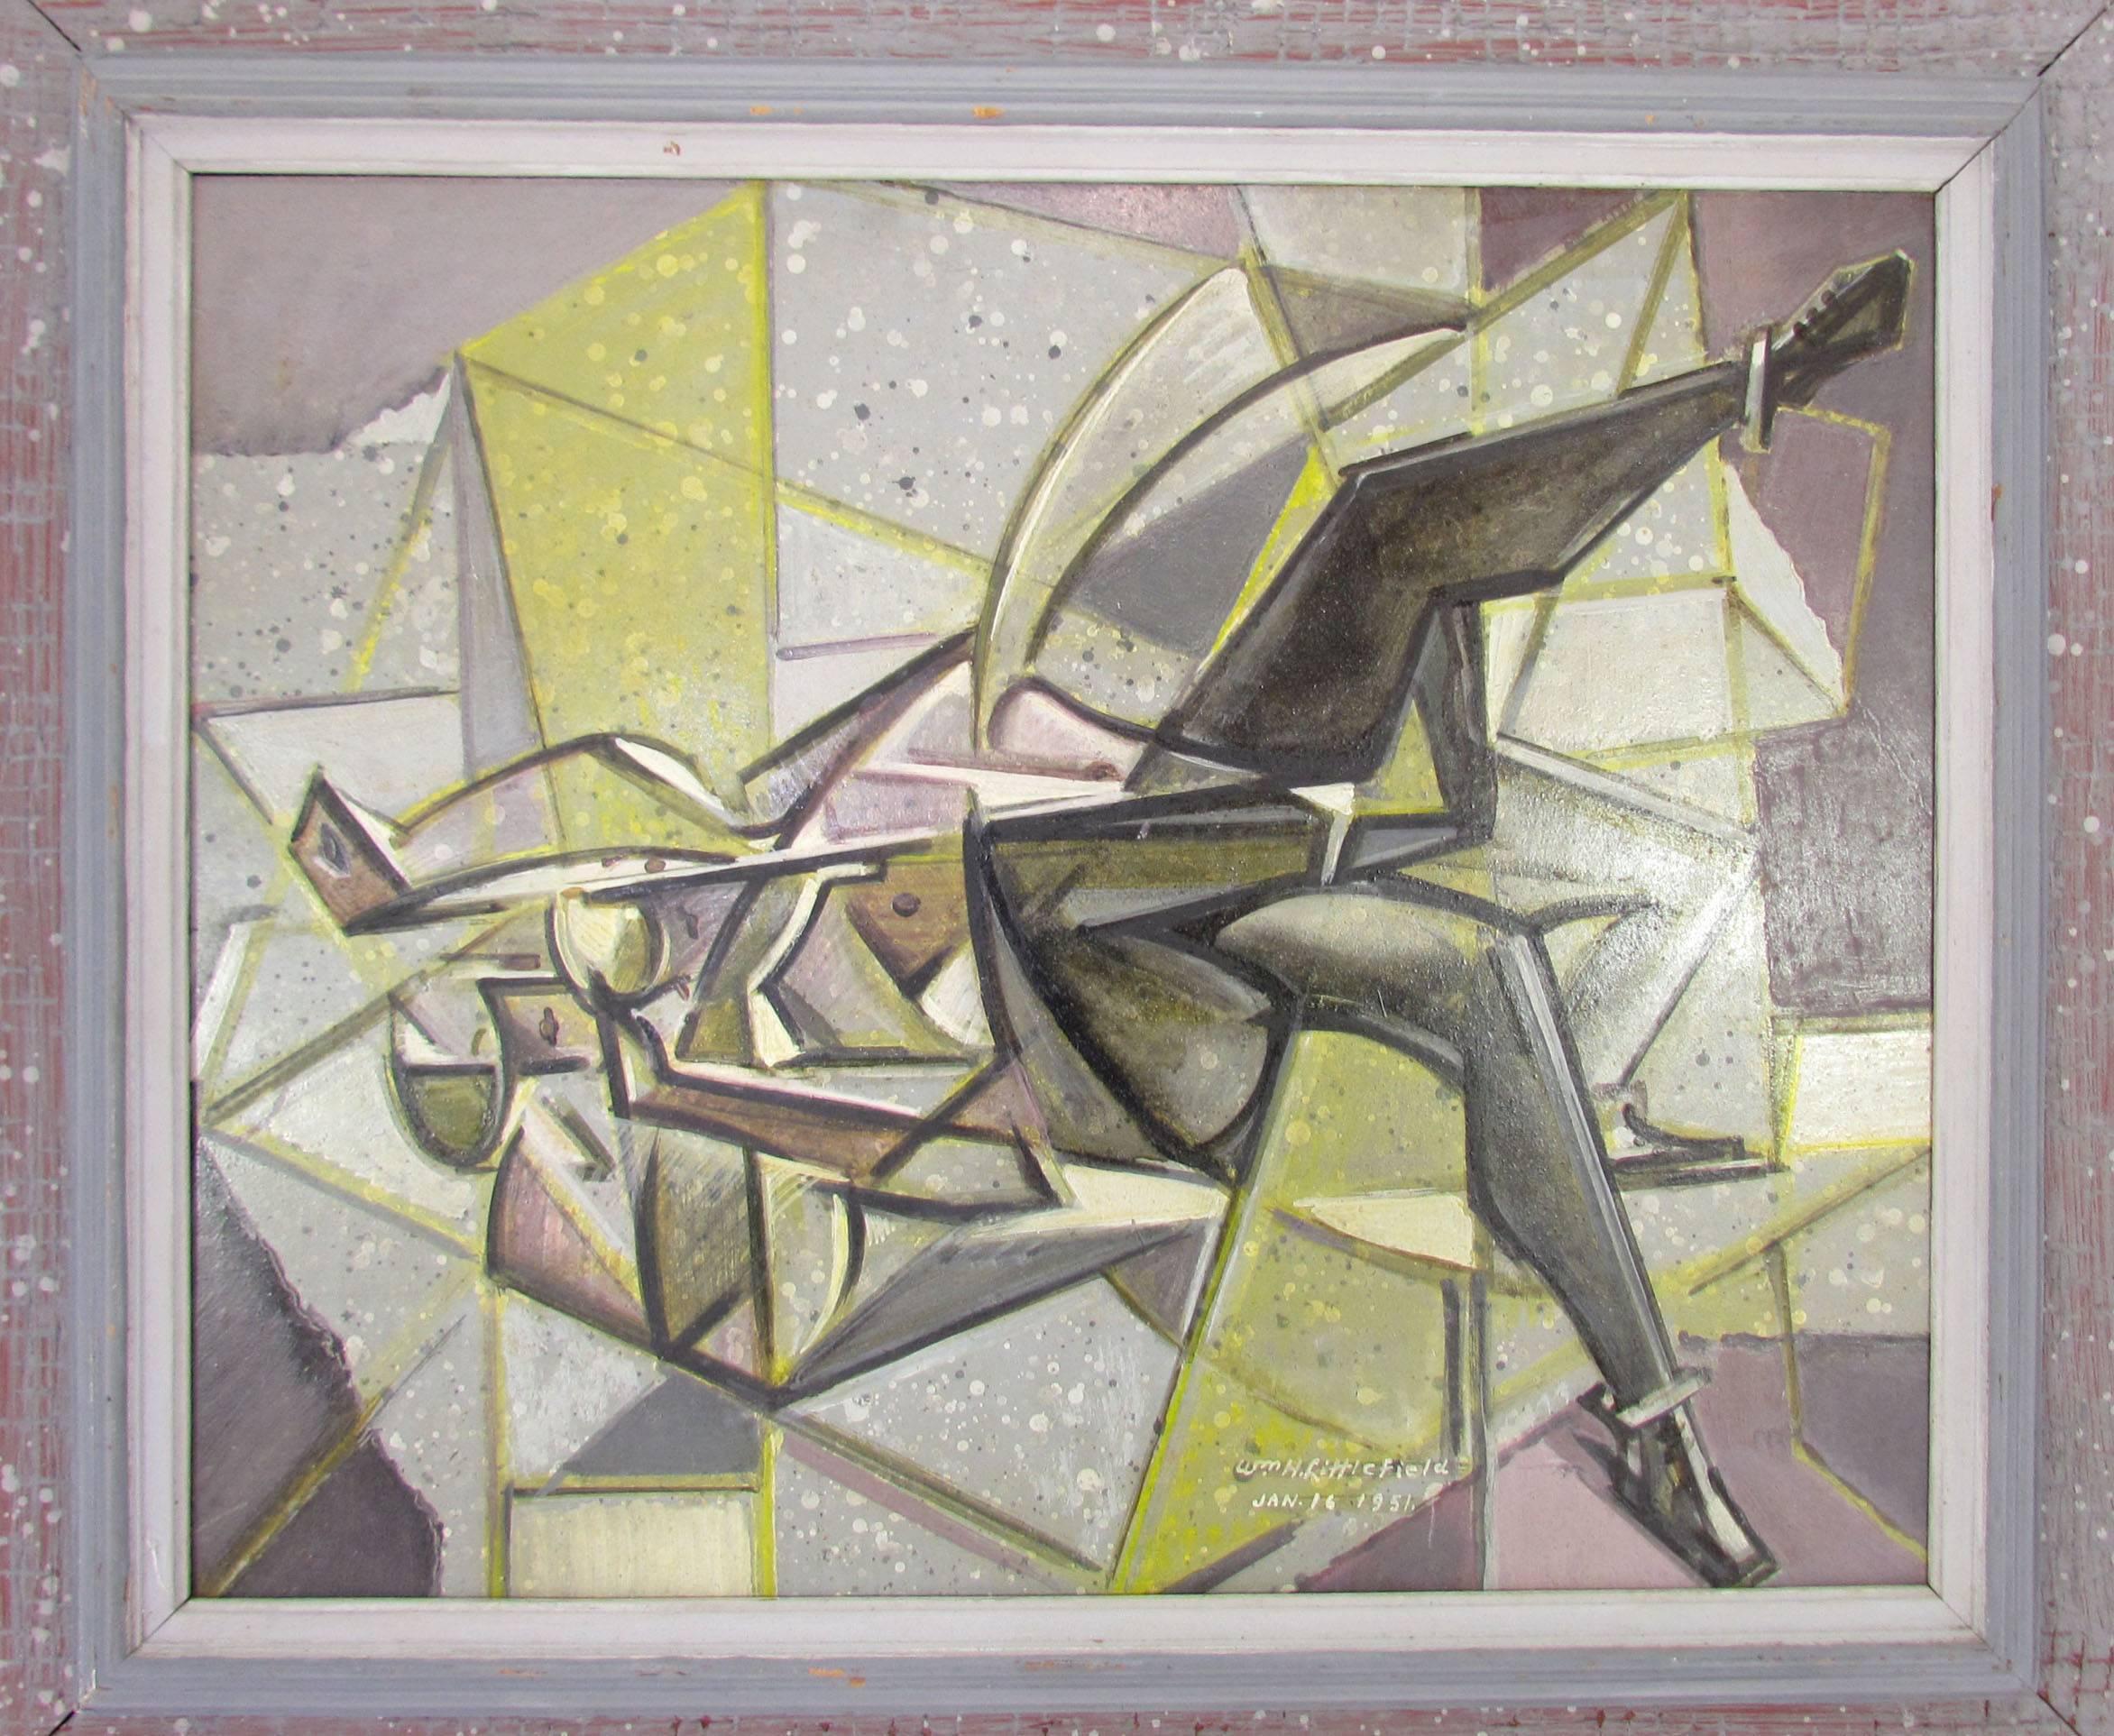 Abstract cubist painting by listed Boston artist William Littlefield, titled 